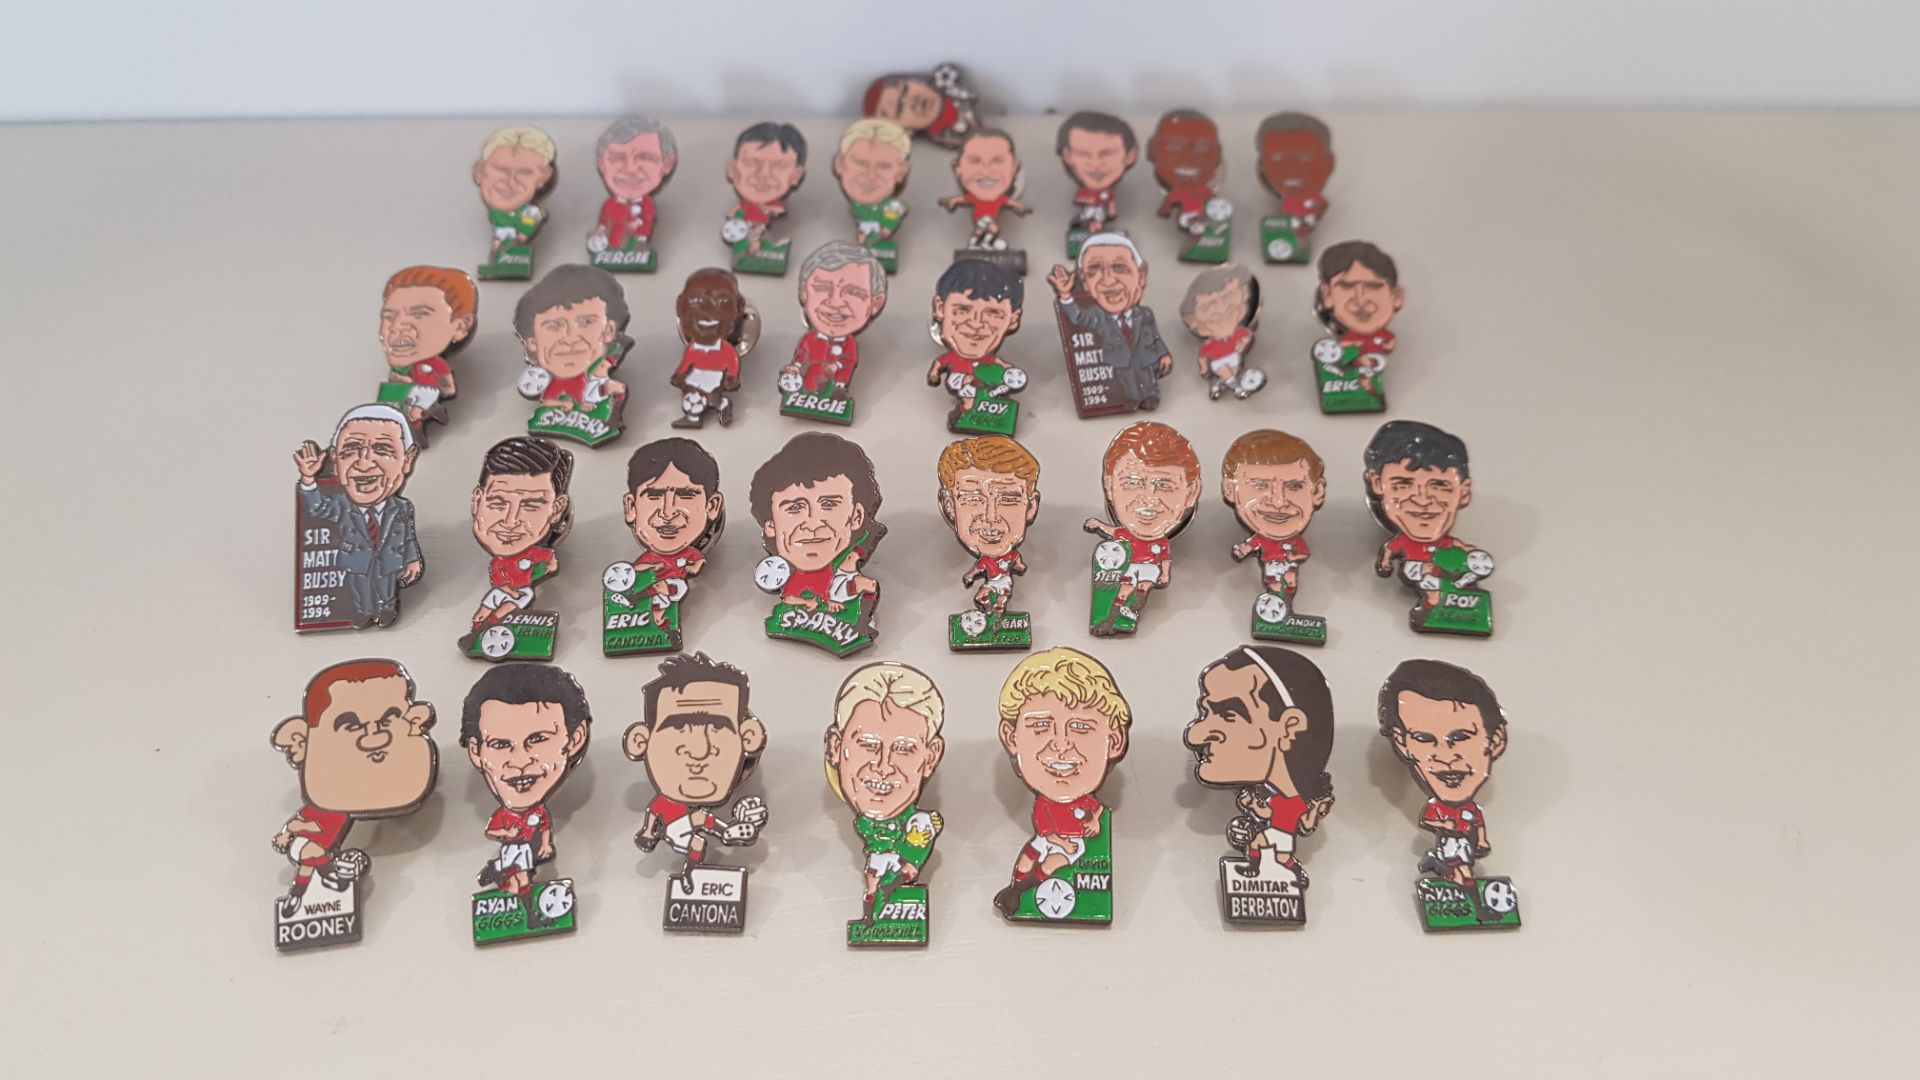 APPROX 33 X LOOSE MANCHESTER UNITED PLAYER CARICATURE PIN BADGES TO INCLUDE - SIR MATT BUSBY,